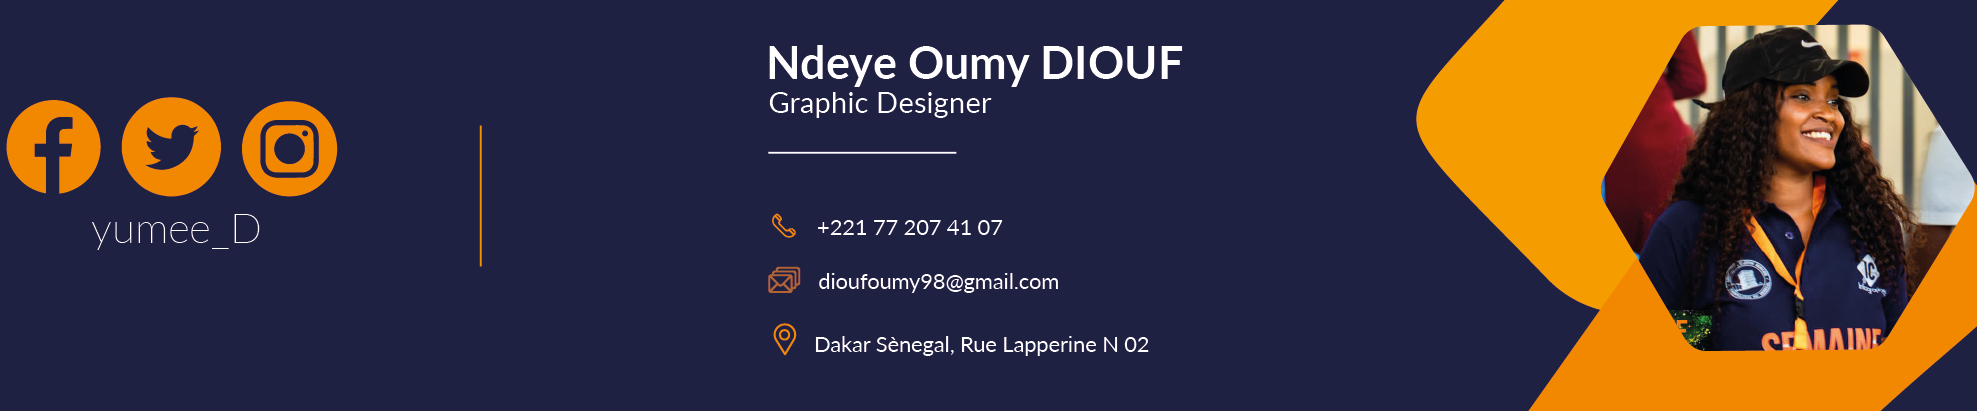 Ndeye Oumy Diouf's profile banner